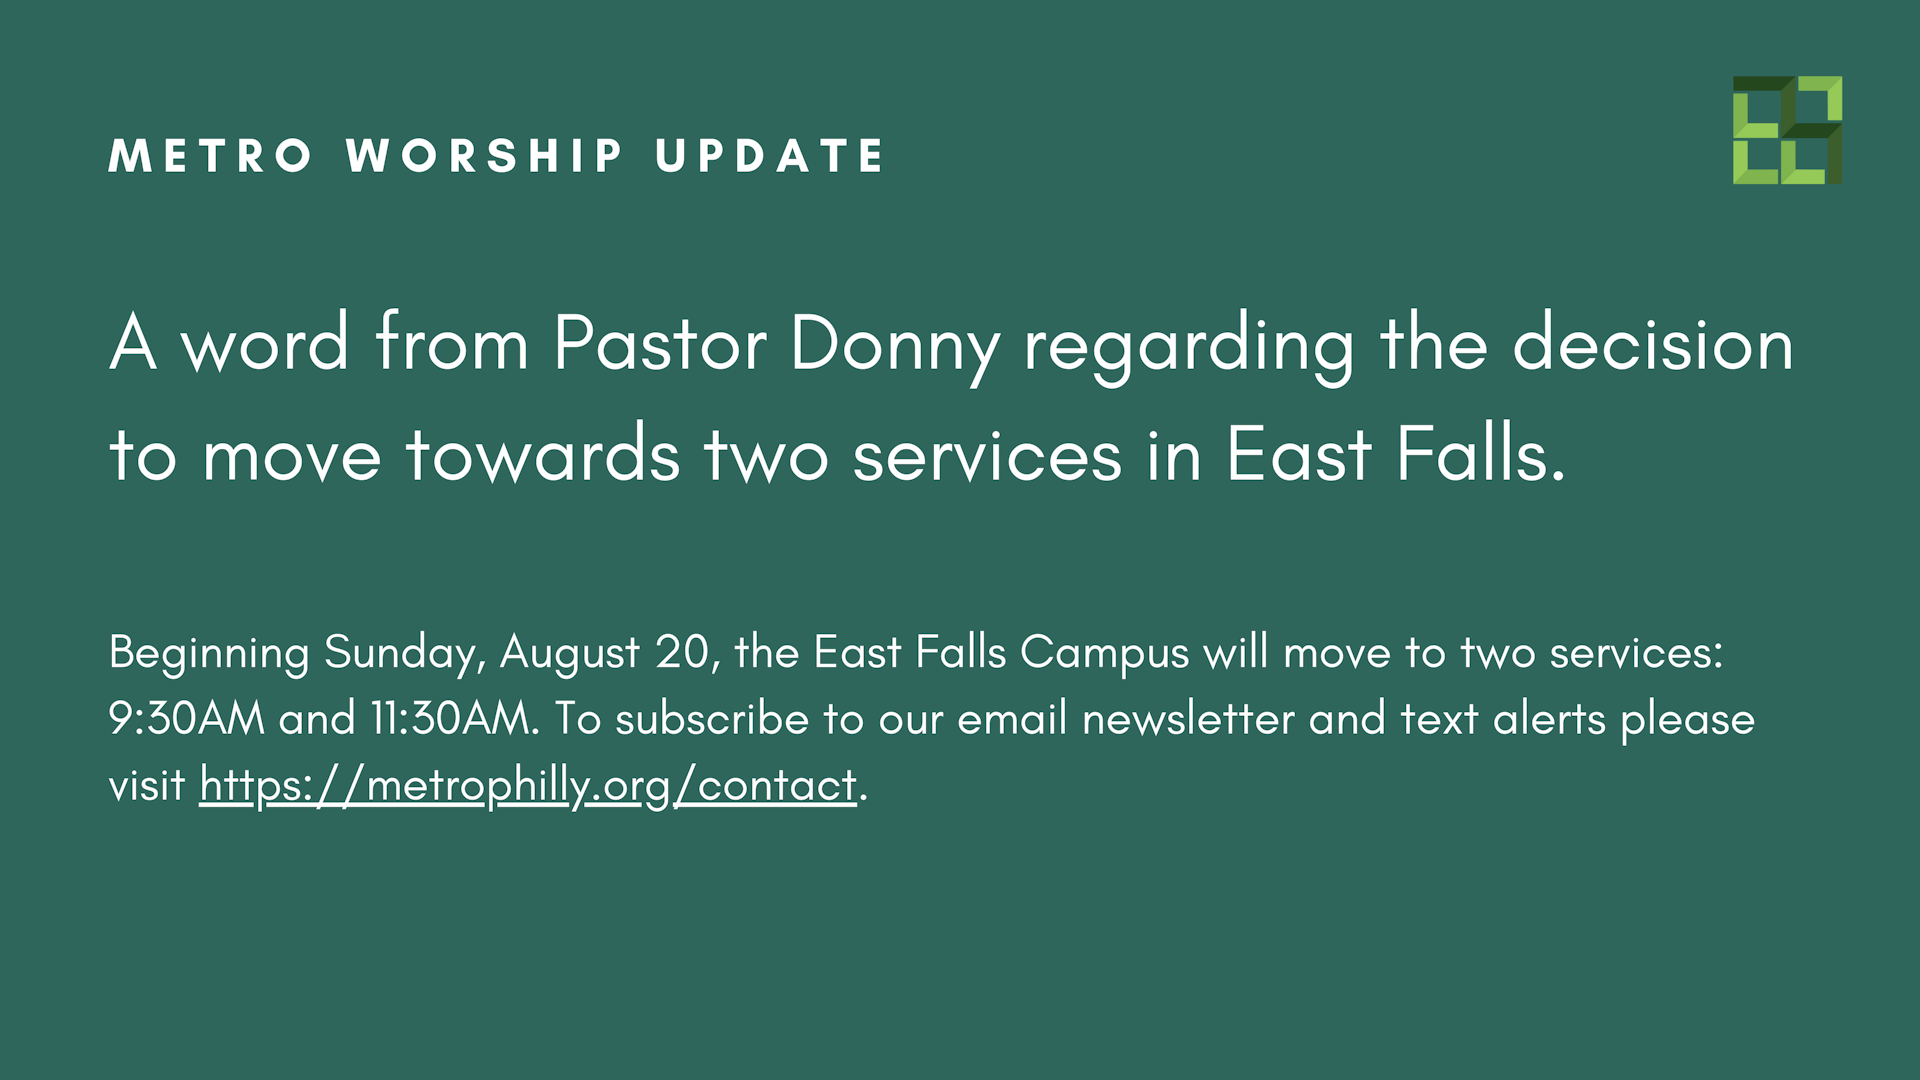 Why We Are Moving to Two Services in East Falls